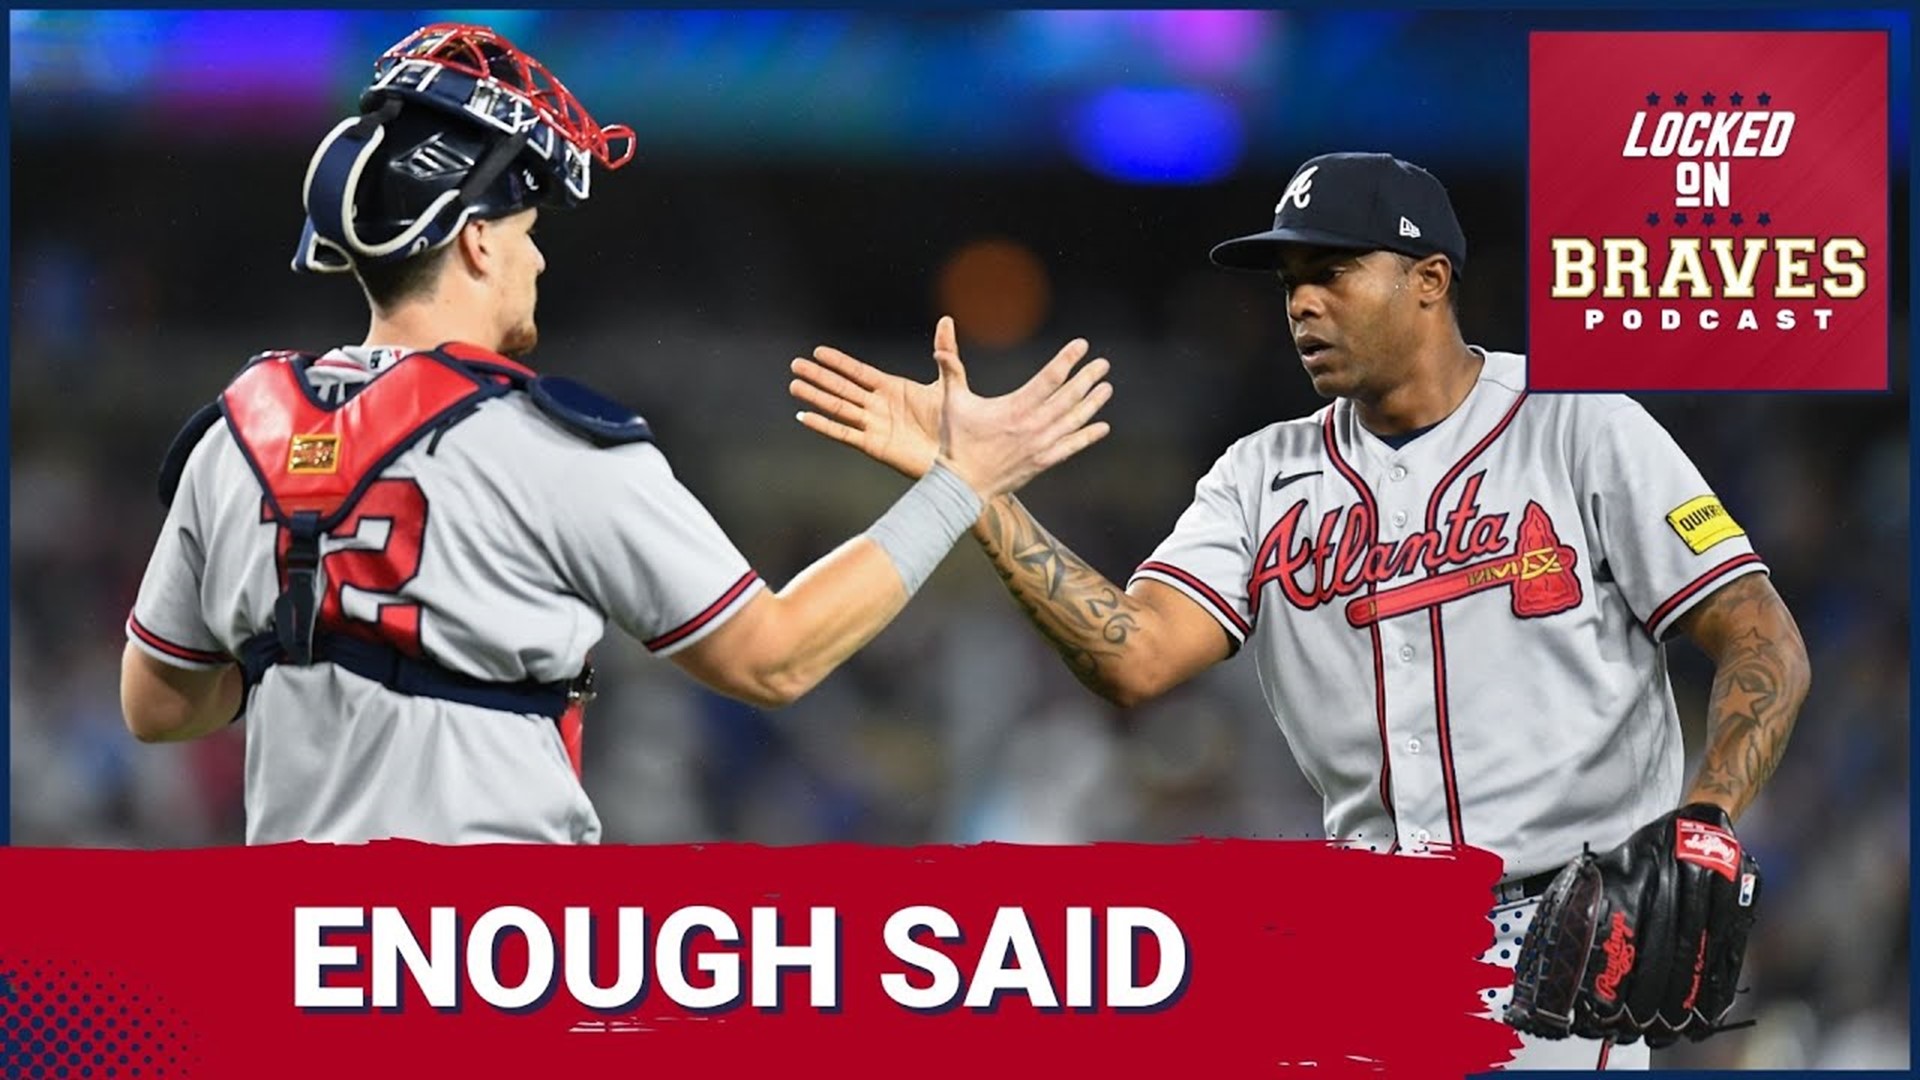 The Atlanta Braves proved their the best team in the NL with a series win over the Dodgers in LA.